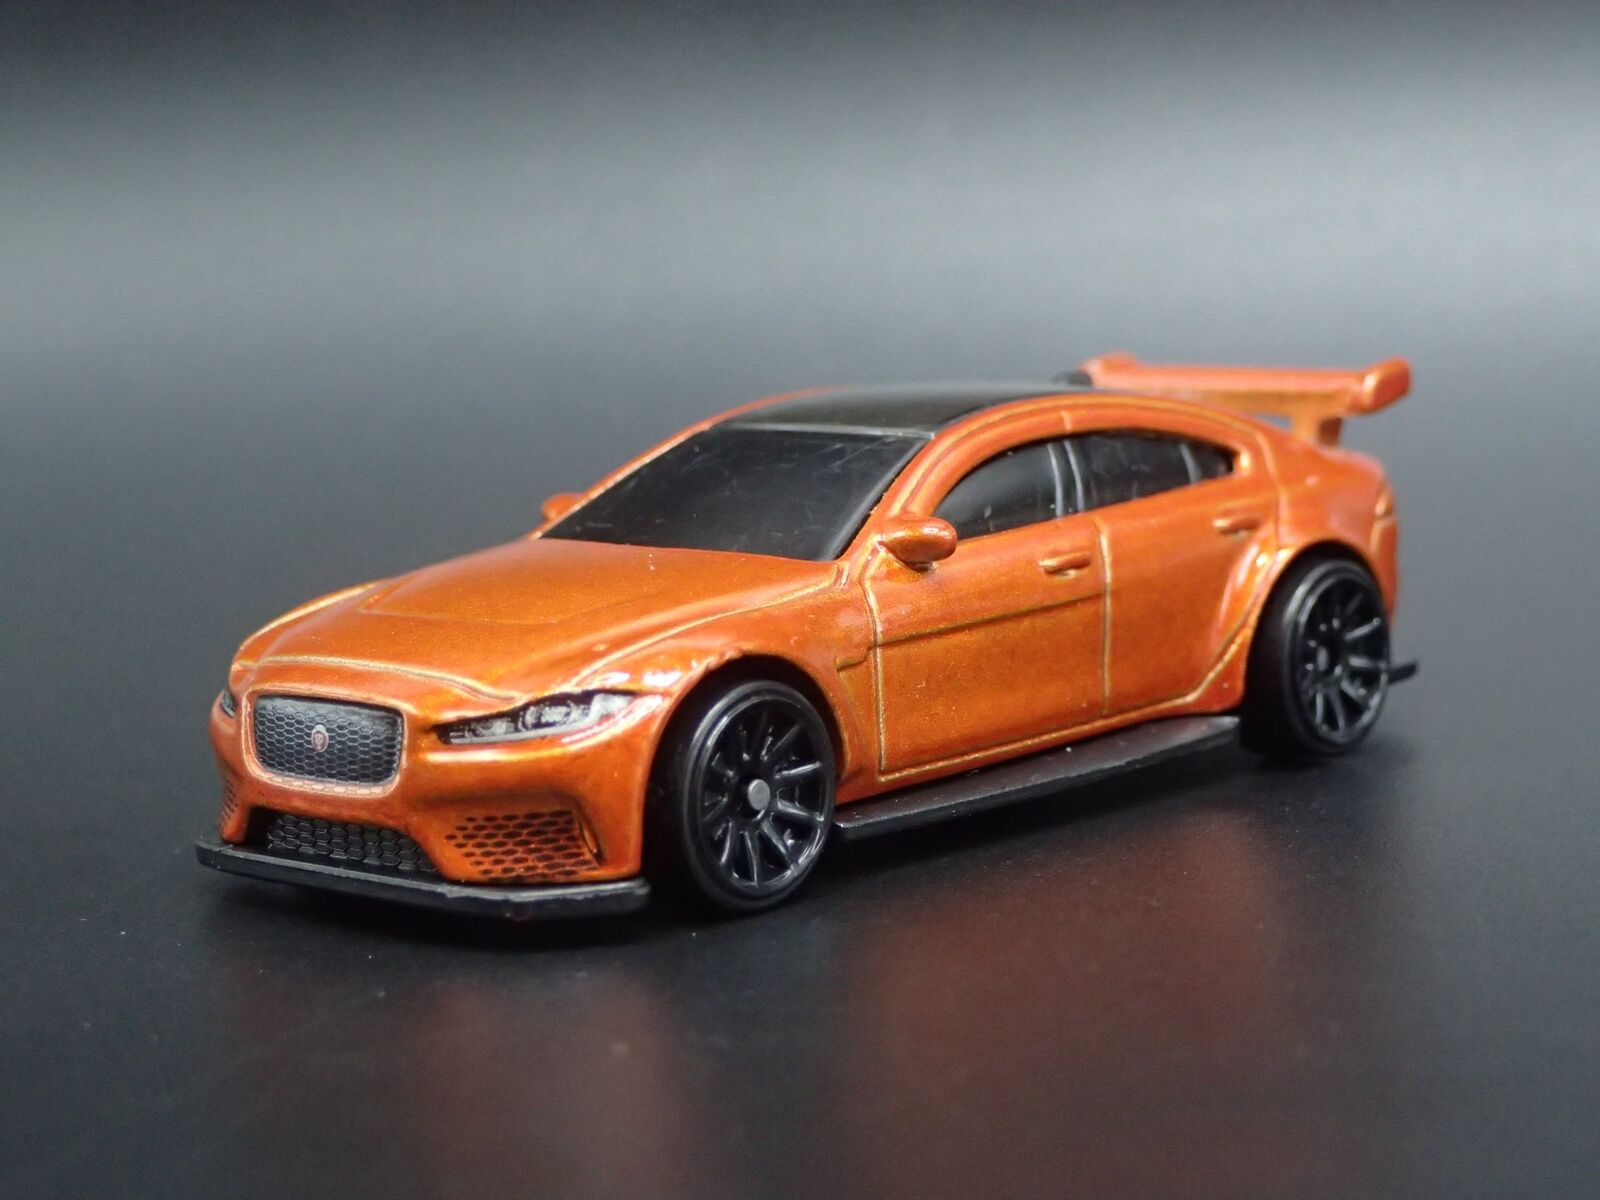 JAGUAR XE SV PROJECT 8 RARE 1:64 SCALE COLLECTIBLE DIORAMA DIECAST relisted